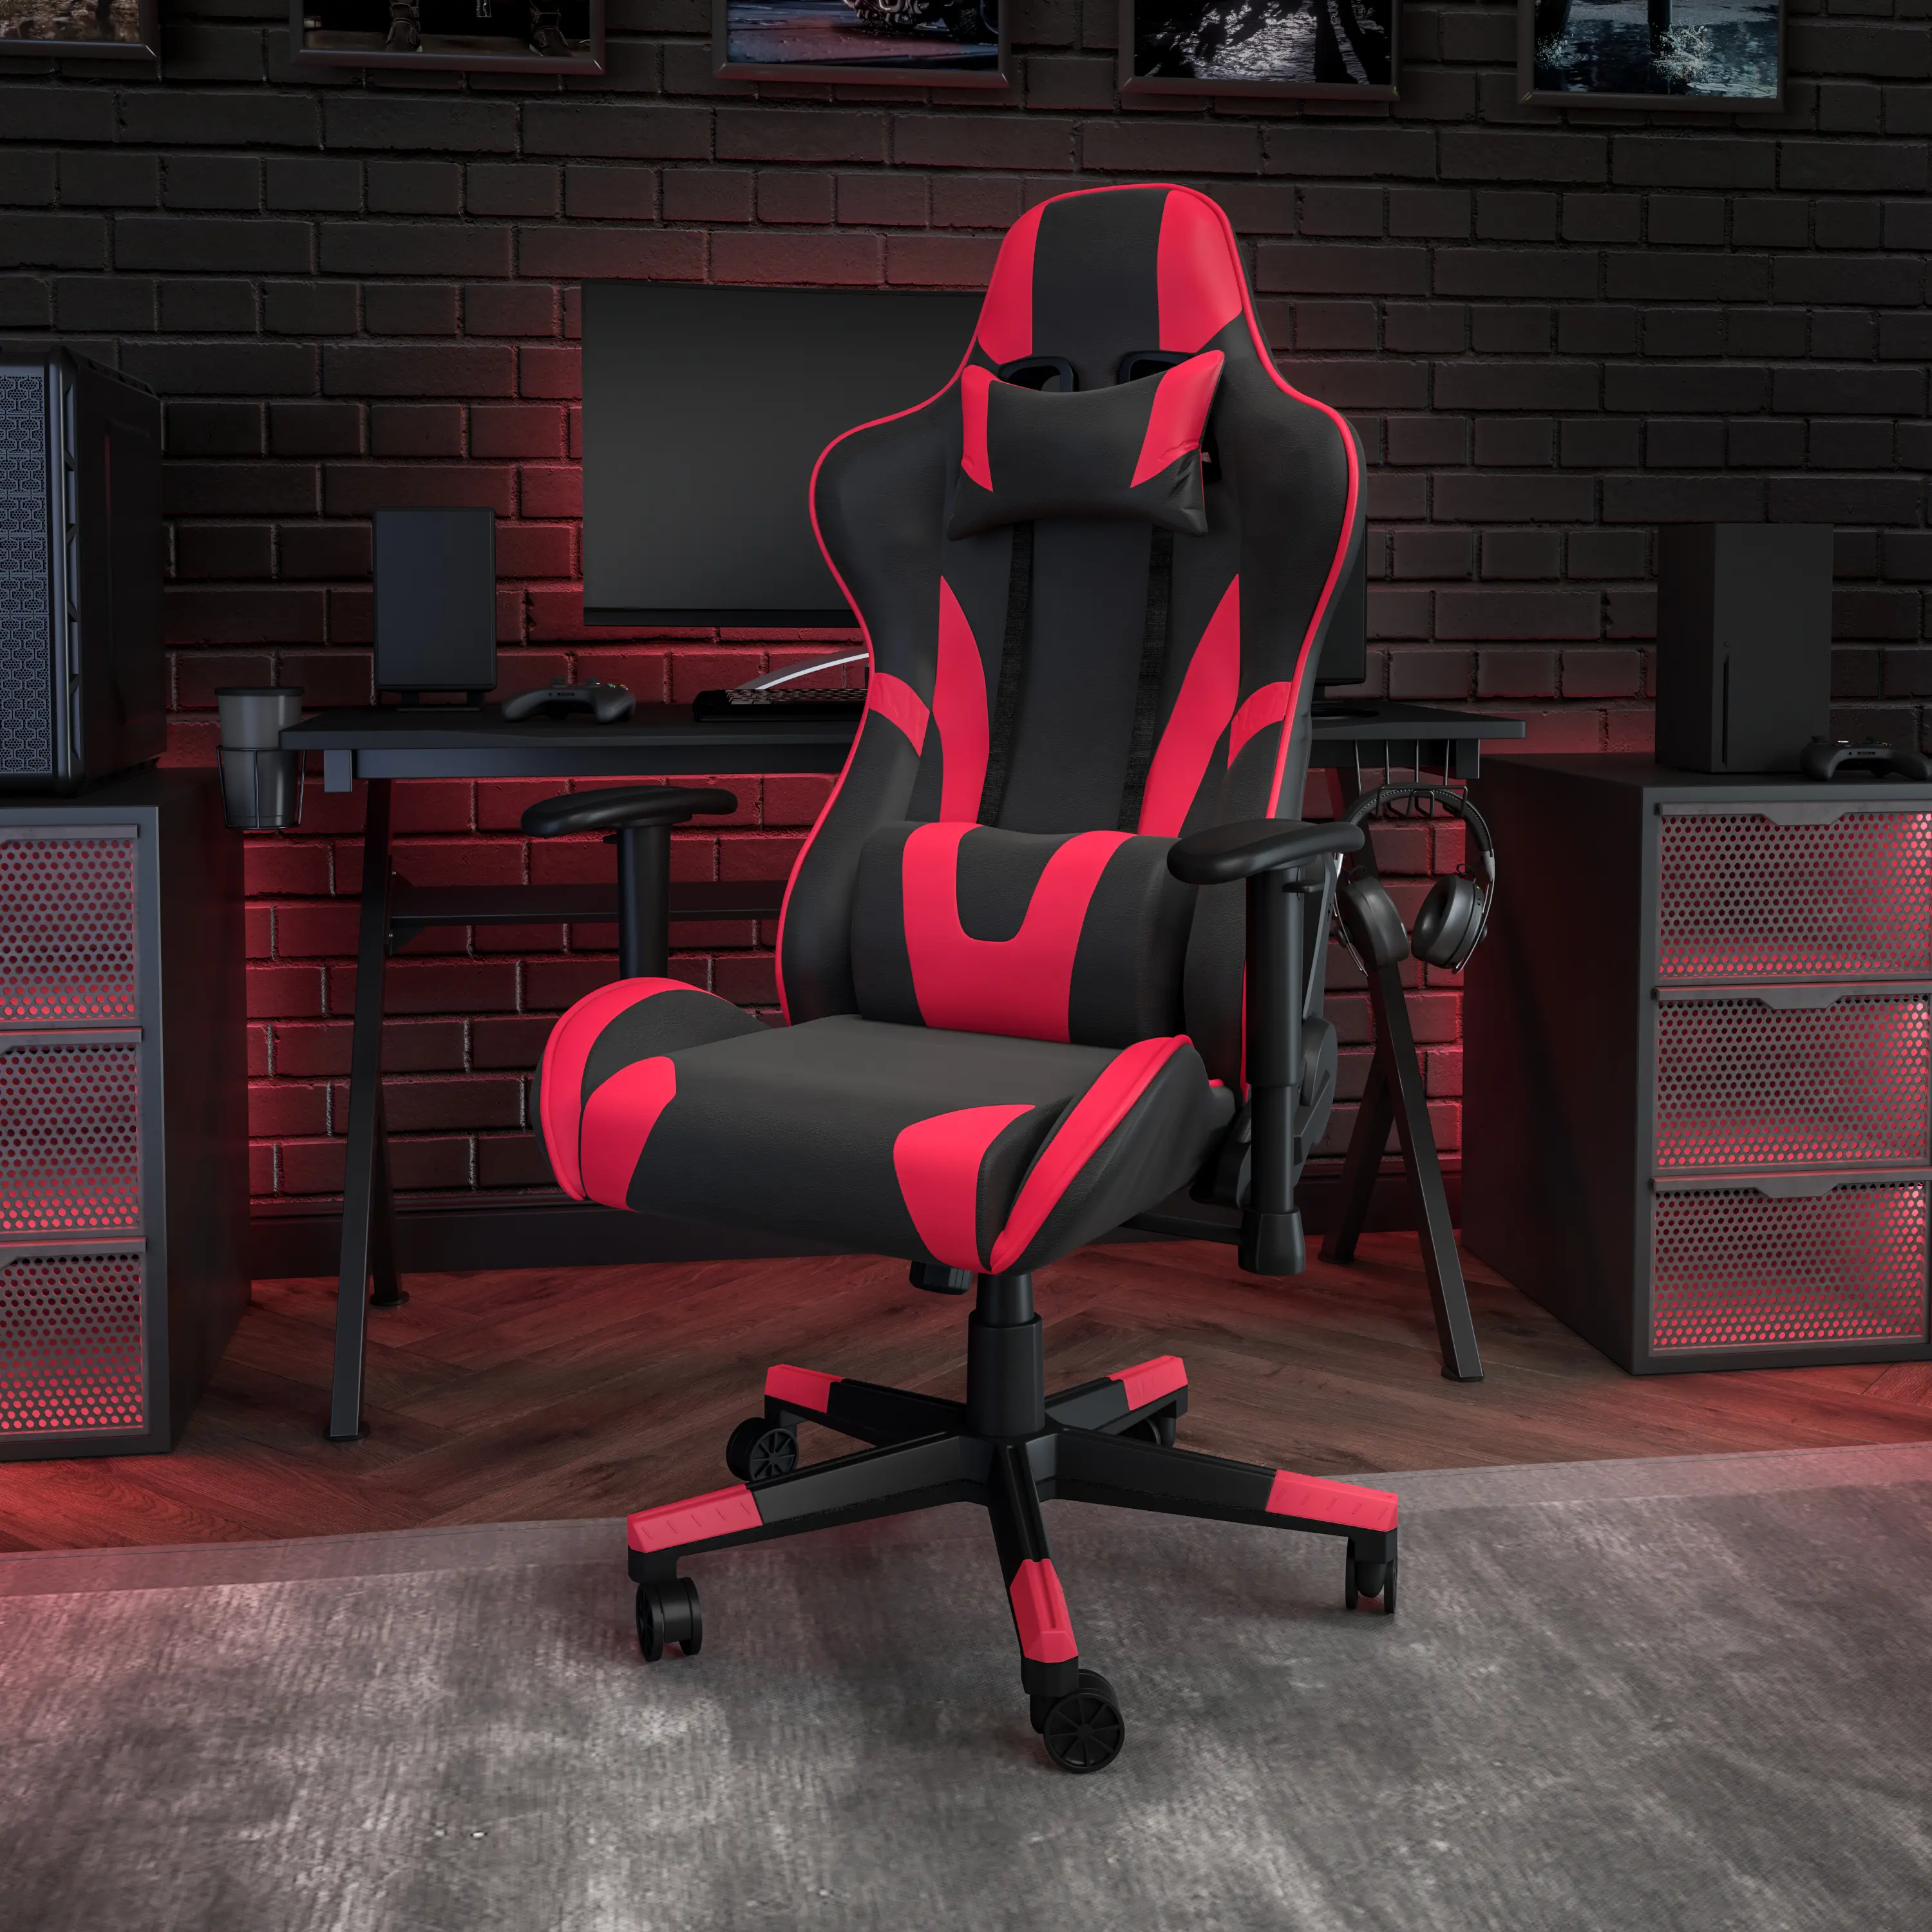 CH-187230-1-RED-GG X20 Red and Black Gaming Swivel Chair sku CH-187230-1-RED-GG